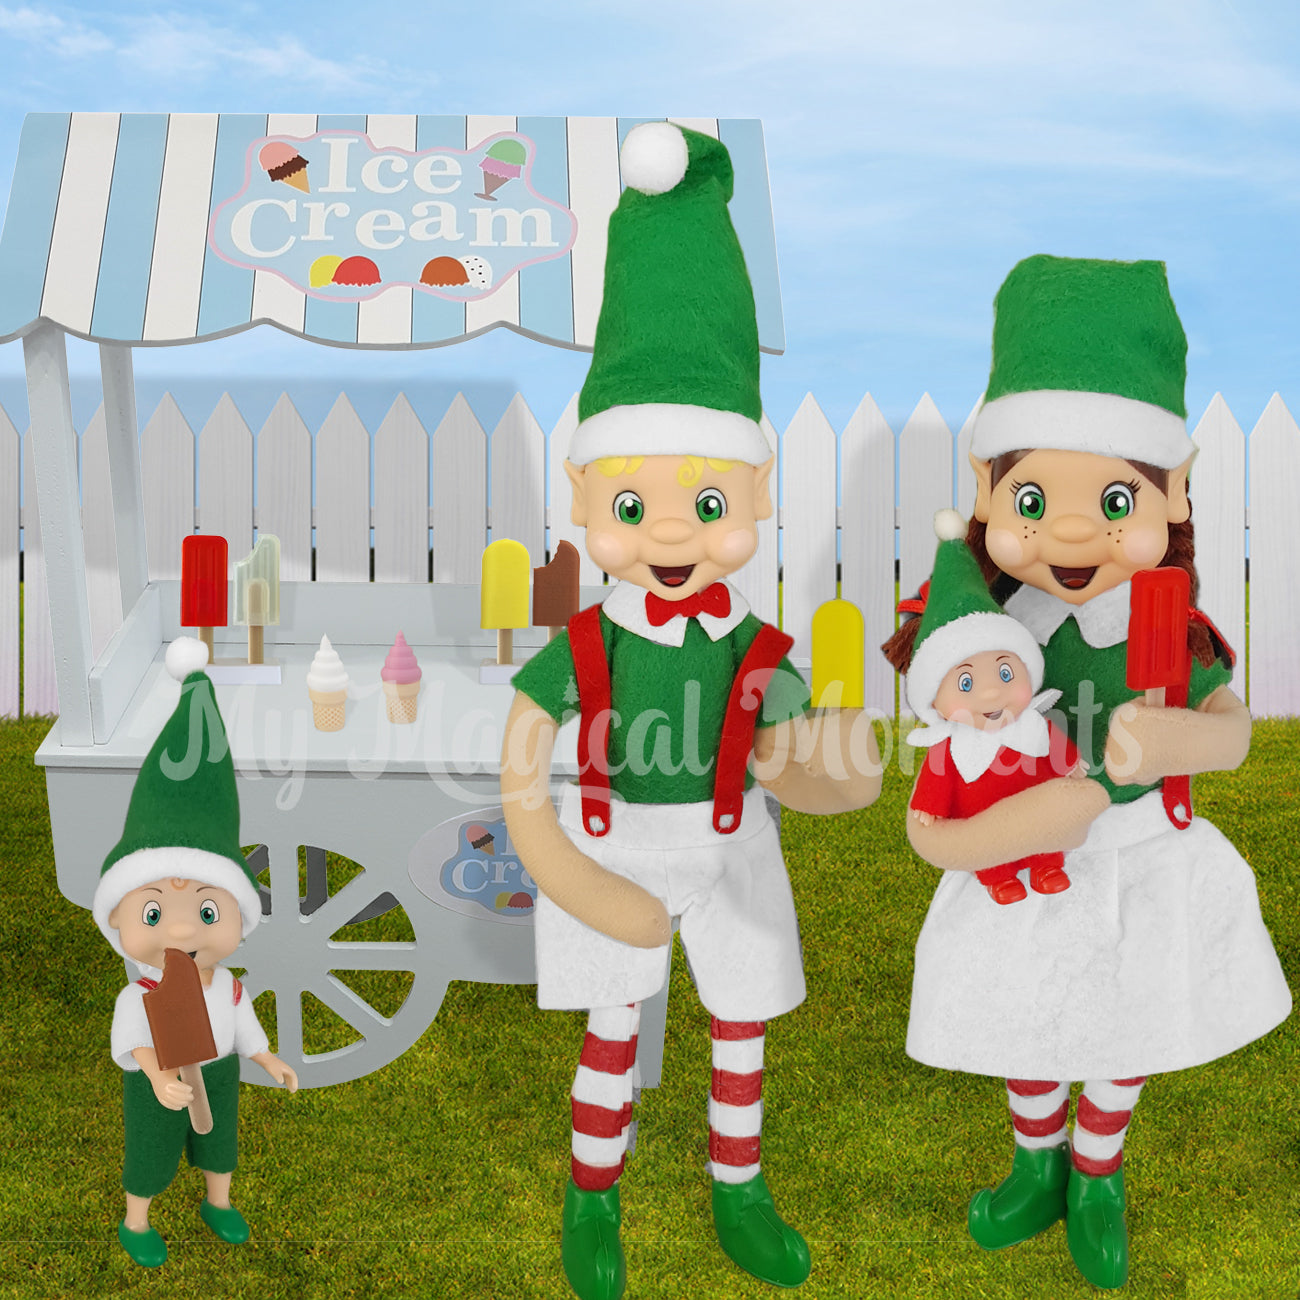 Elves eating ice cream as a family from an ice cream stand